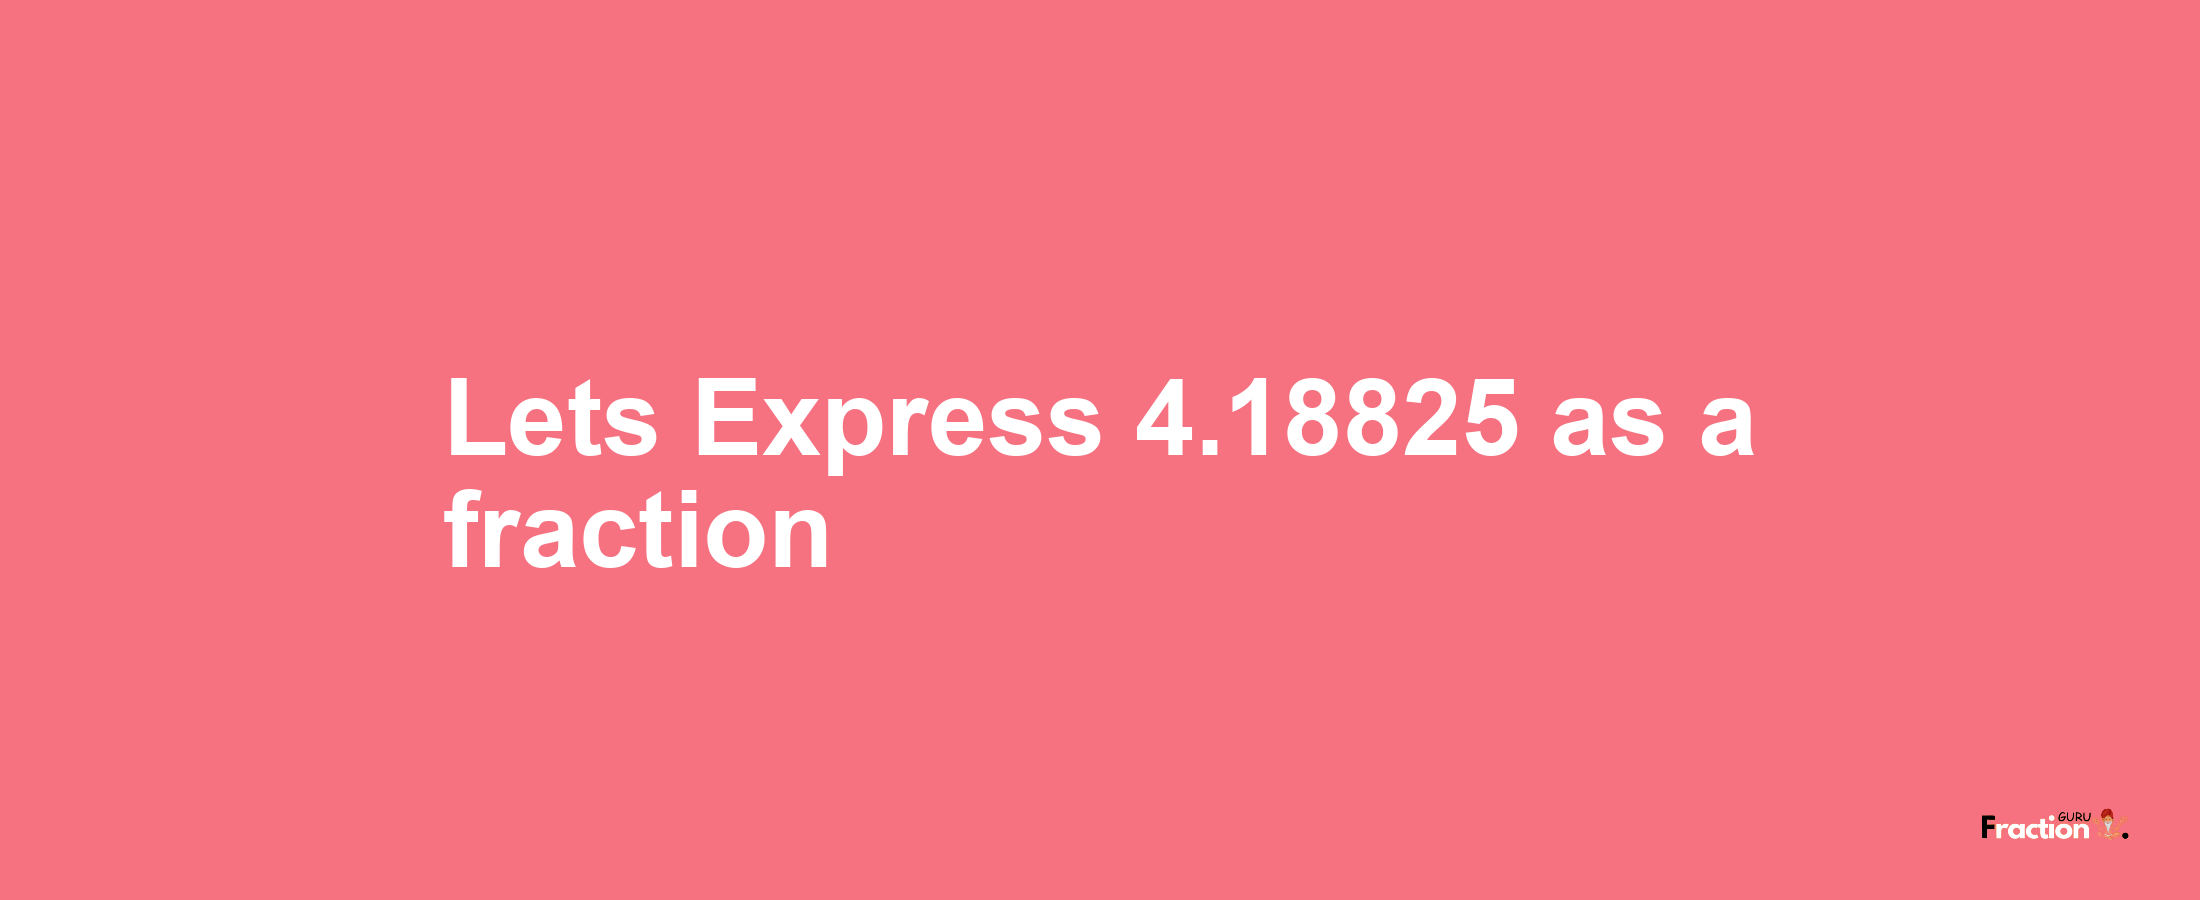 Lets Express 4.18825 as afraction